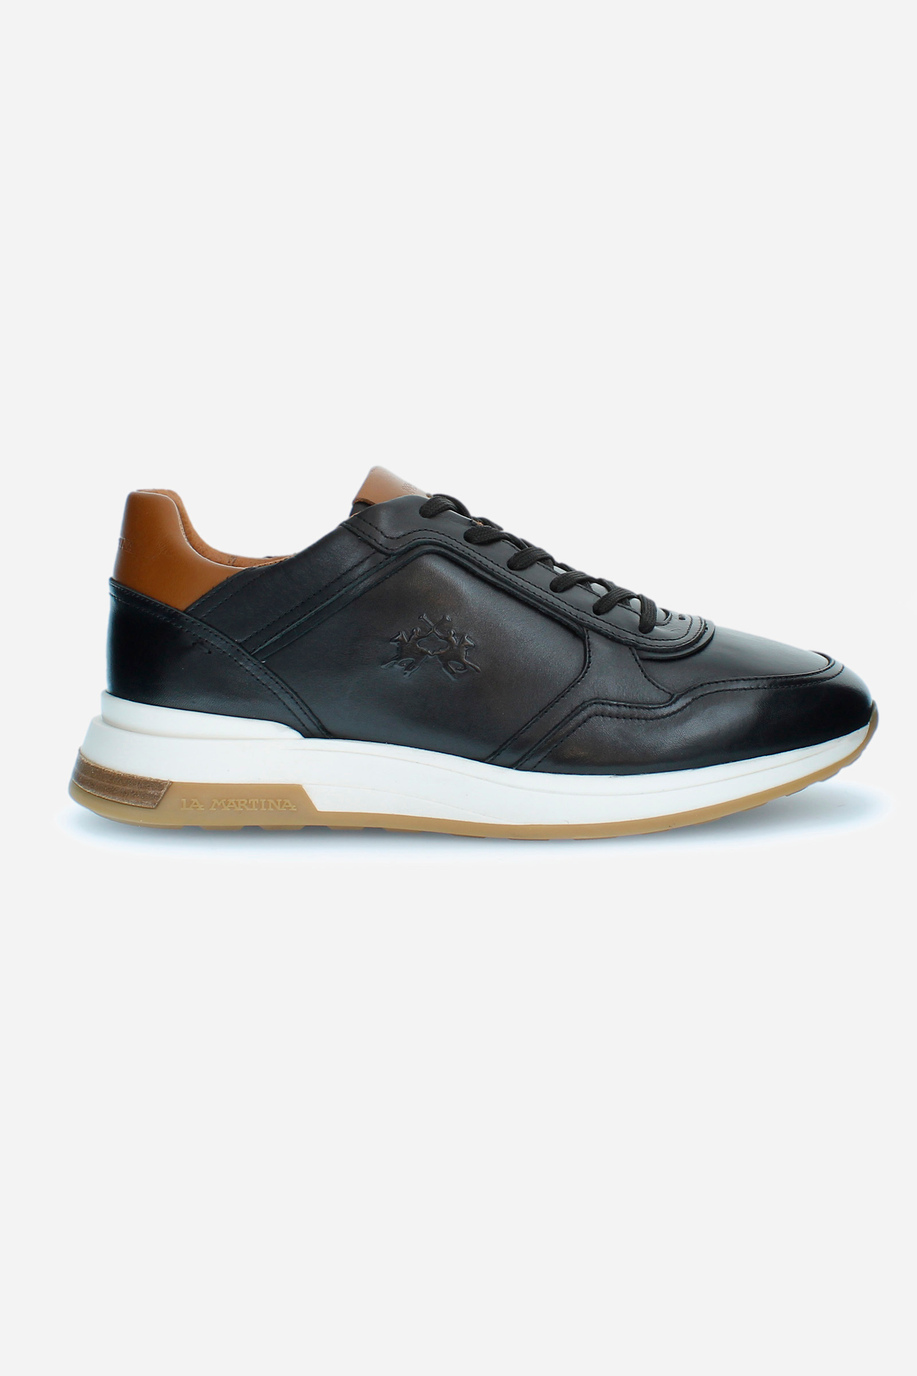 Men's trainers with raised sole - Footwear | La Martina - Official Online Shop